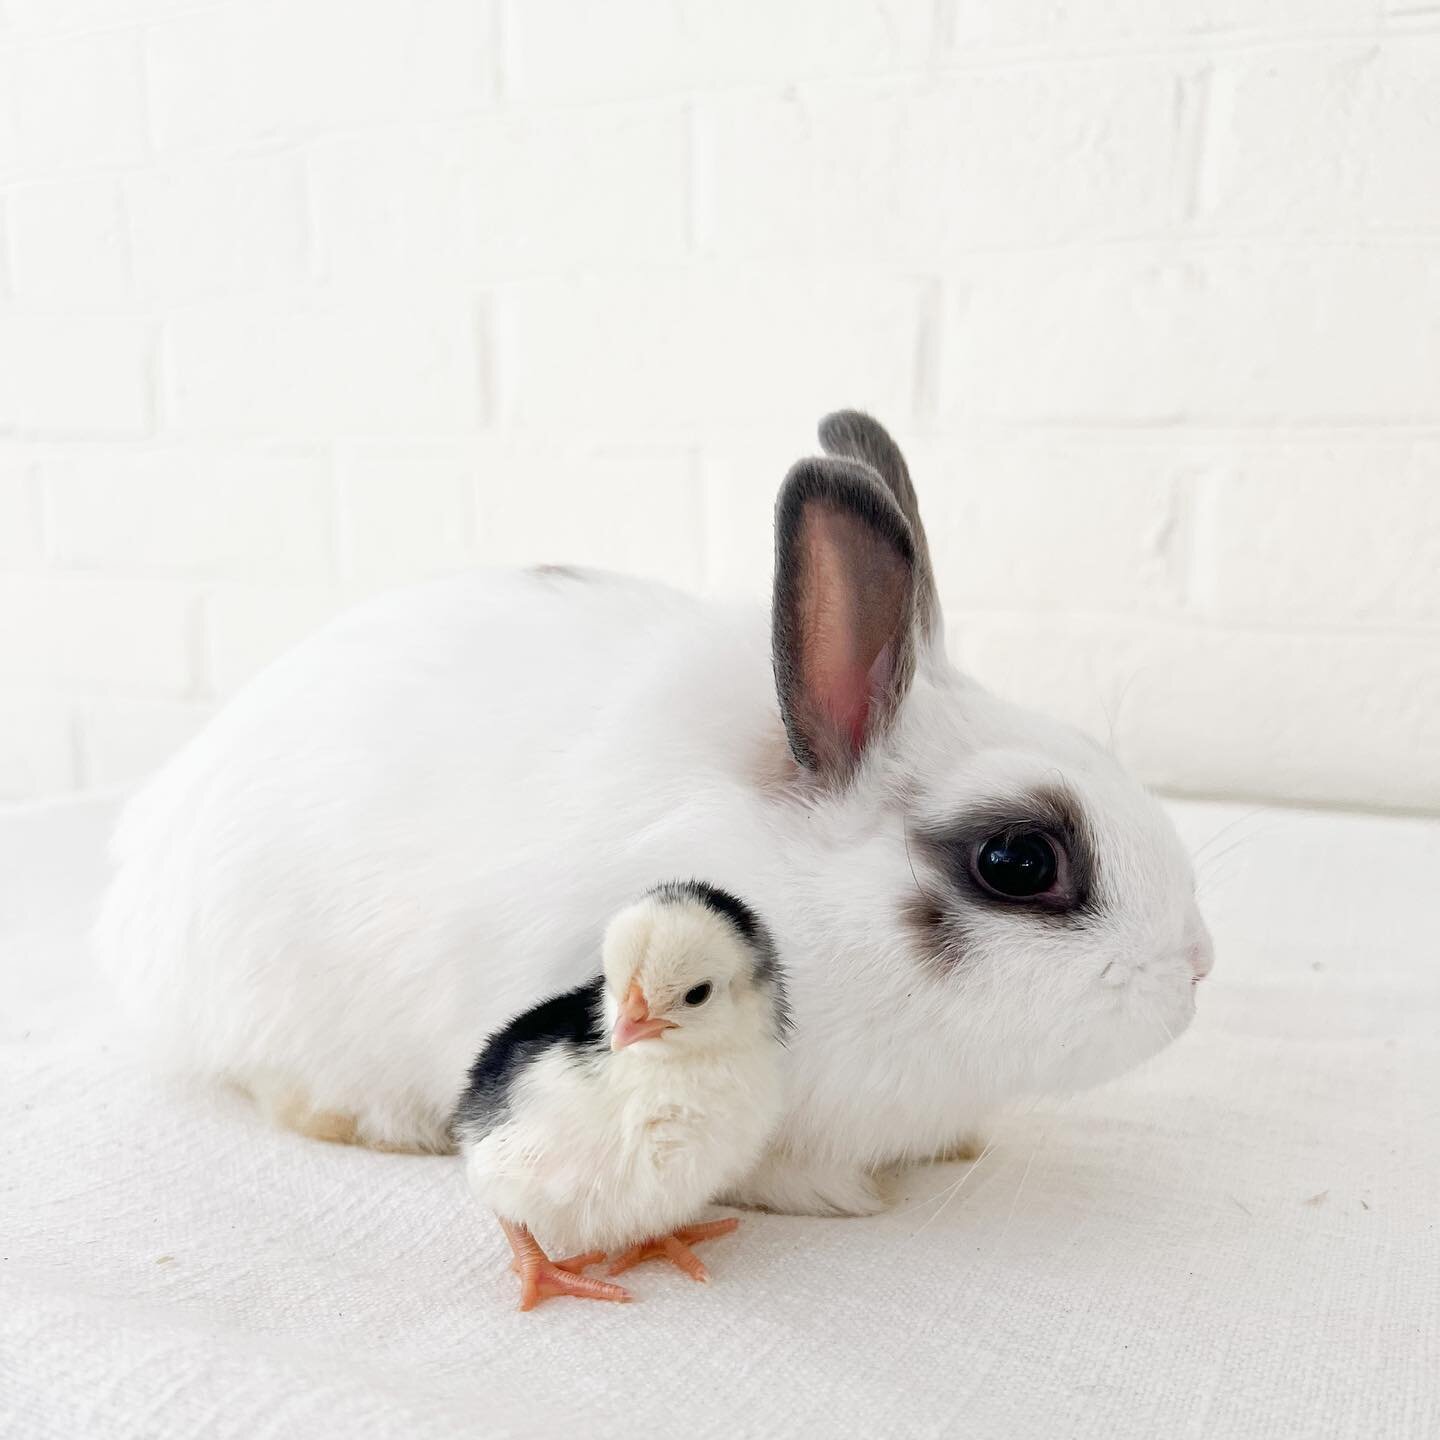 We can be friends if you want 😊

Stop by for some #bunnytherapy and visit the fresh chicks before the summer is over! Check out the &ldquo;Visit&rdquo; tab on our website. 

#rabbittherapy #animaltherapy #pettherapy #agrotourism #chapelhill #mentalh